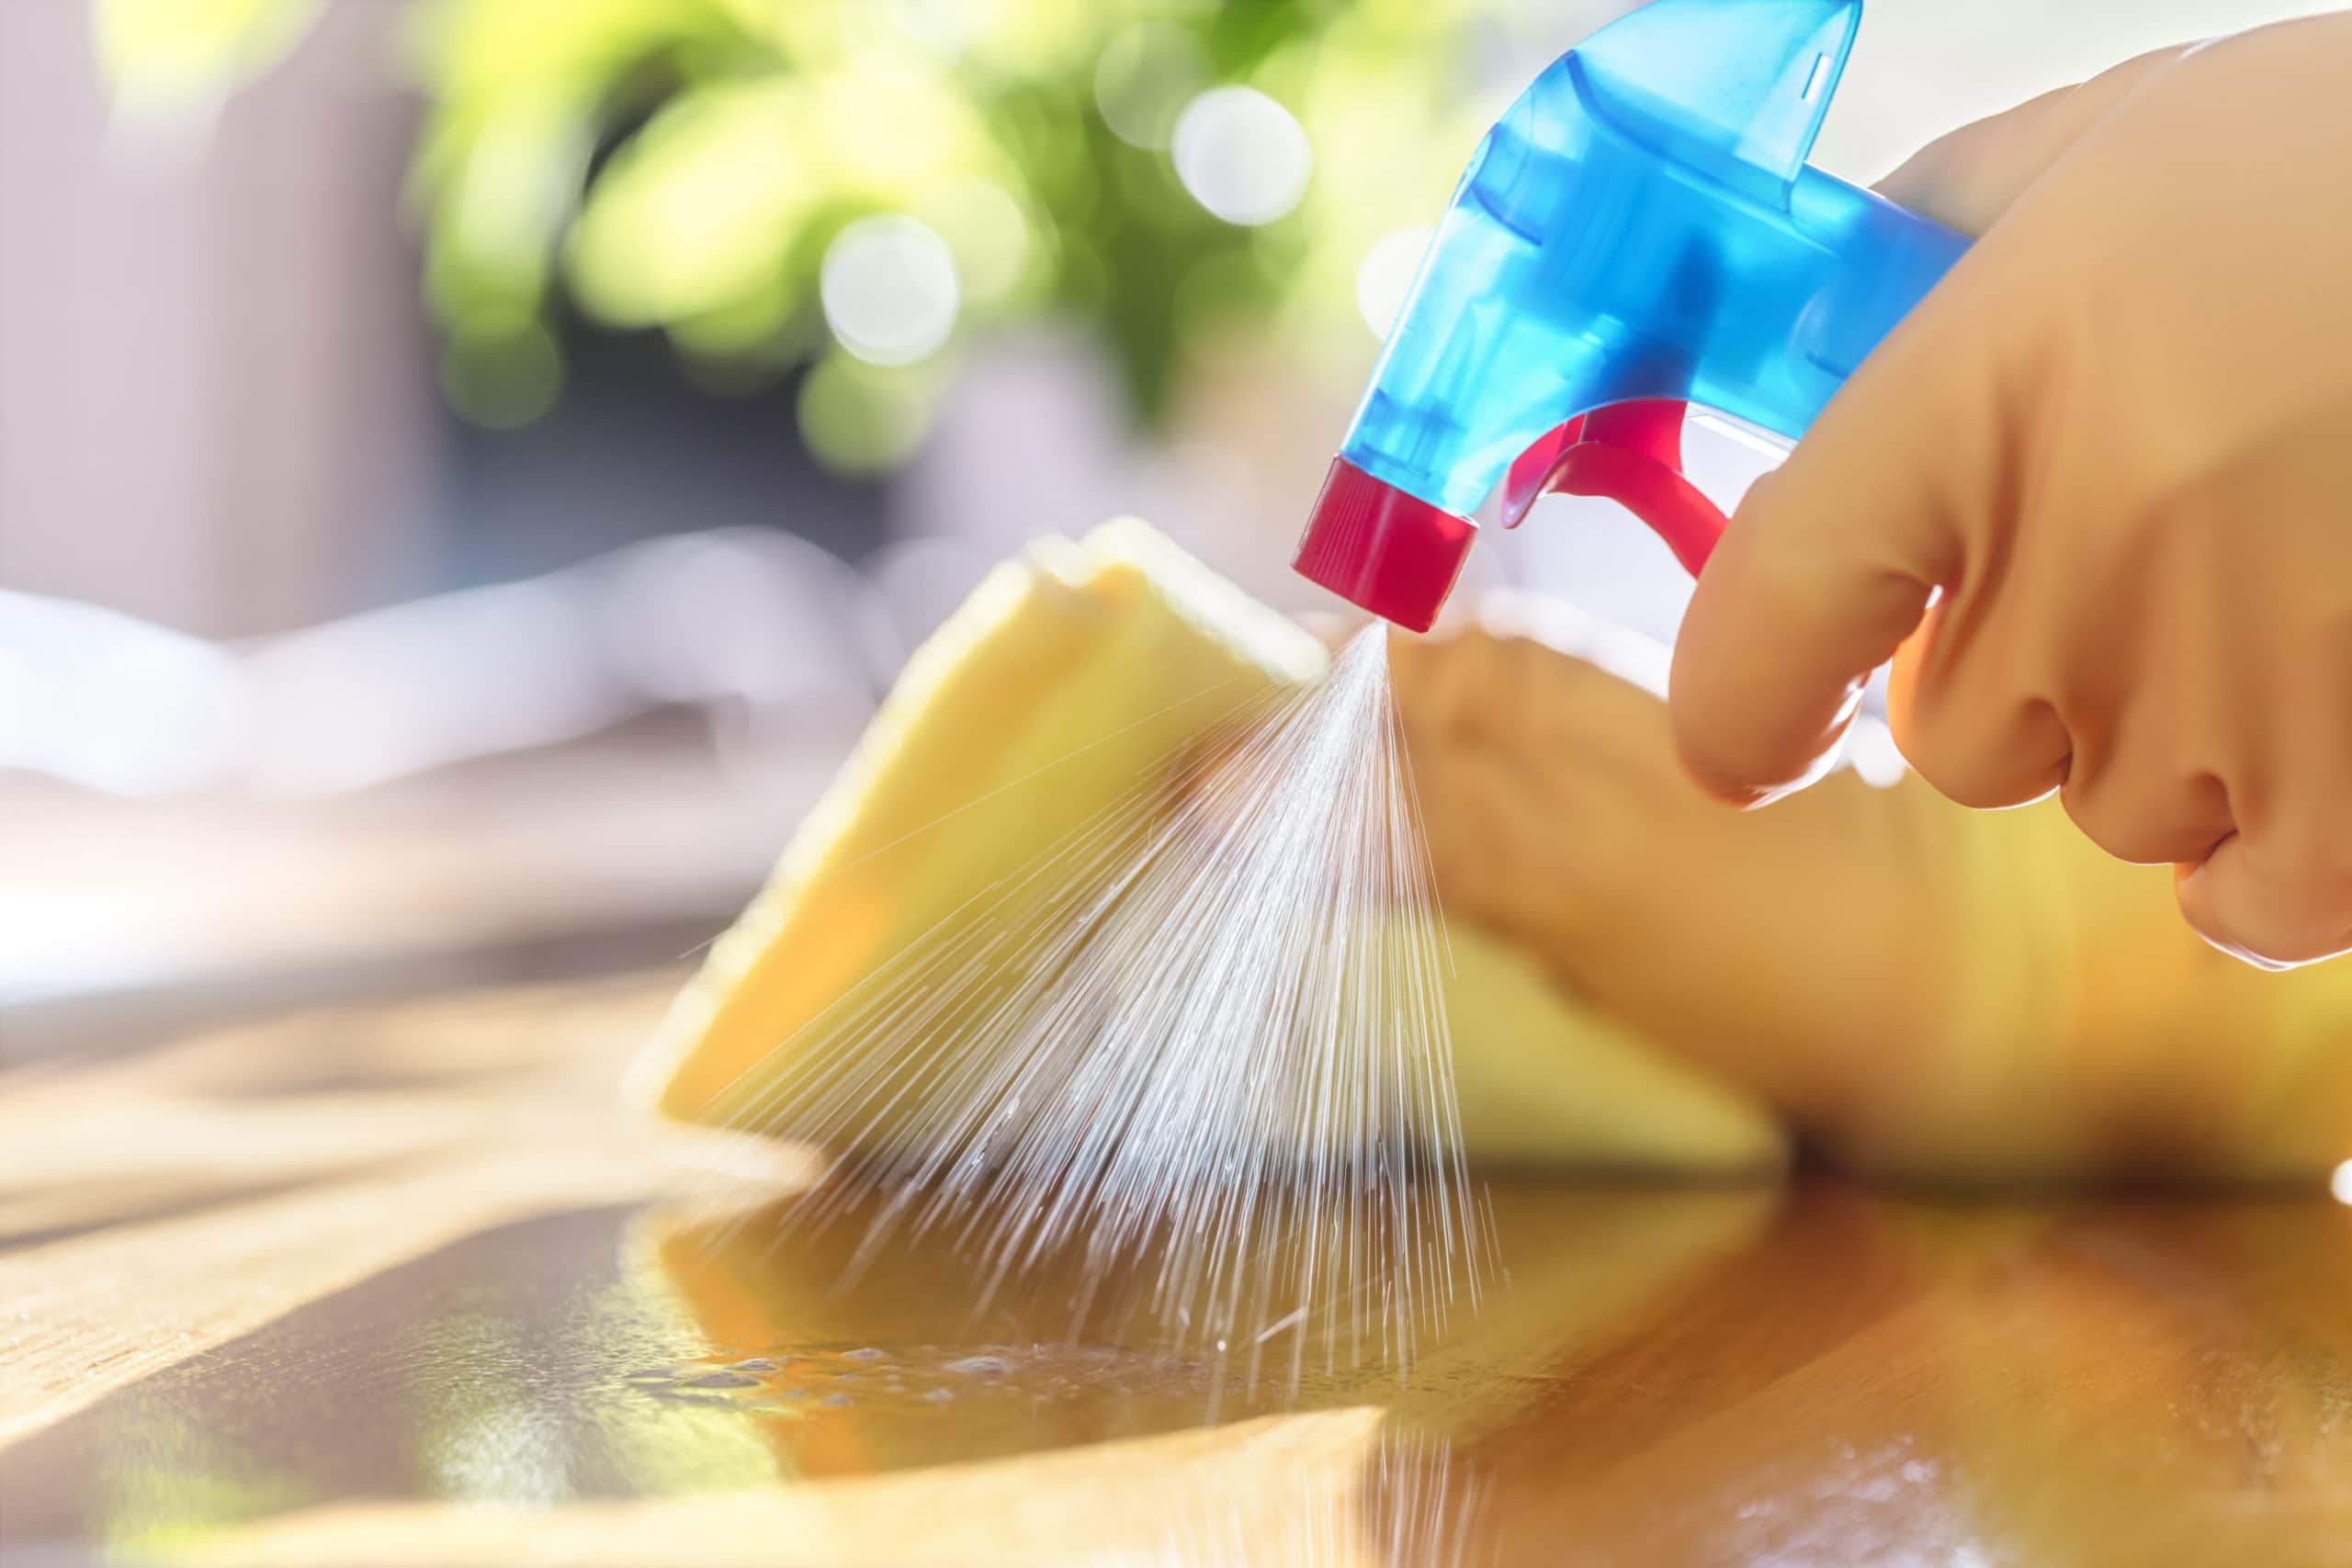 5 Surfaces to Sanitize in Under 10 Minutes